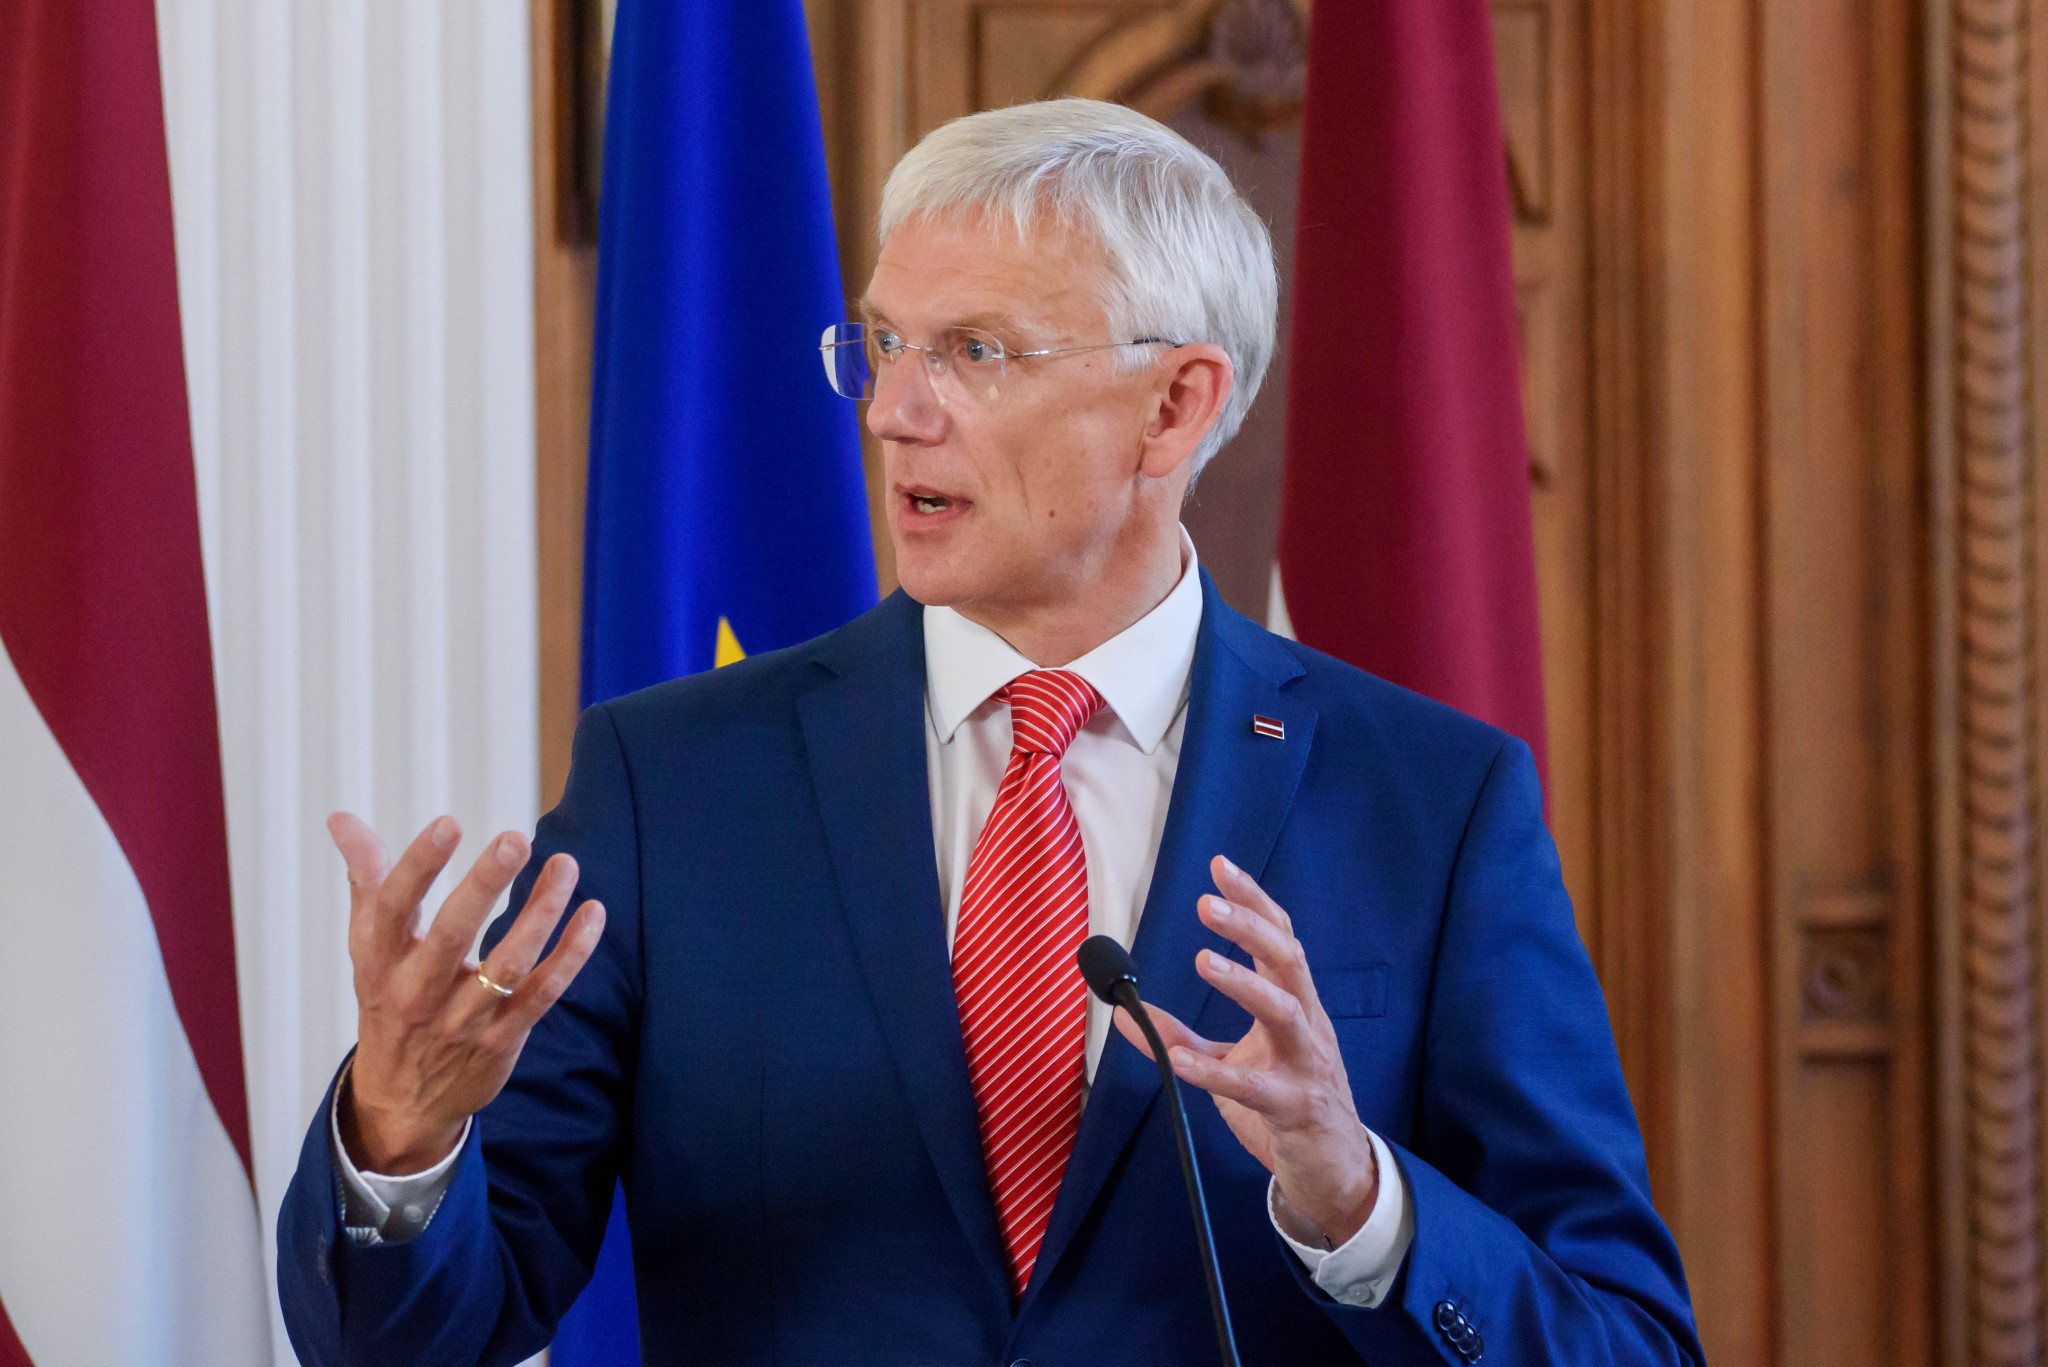 Latvian Prime Minister Krisjanis Karins has warned the country may consider pulling out of co-organising the 2021 IIHF Men's World Championship because of the situation in Belarus ©Getty Images